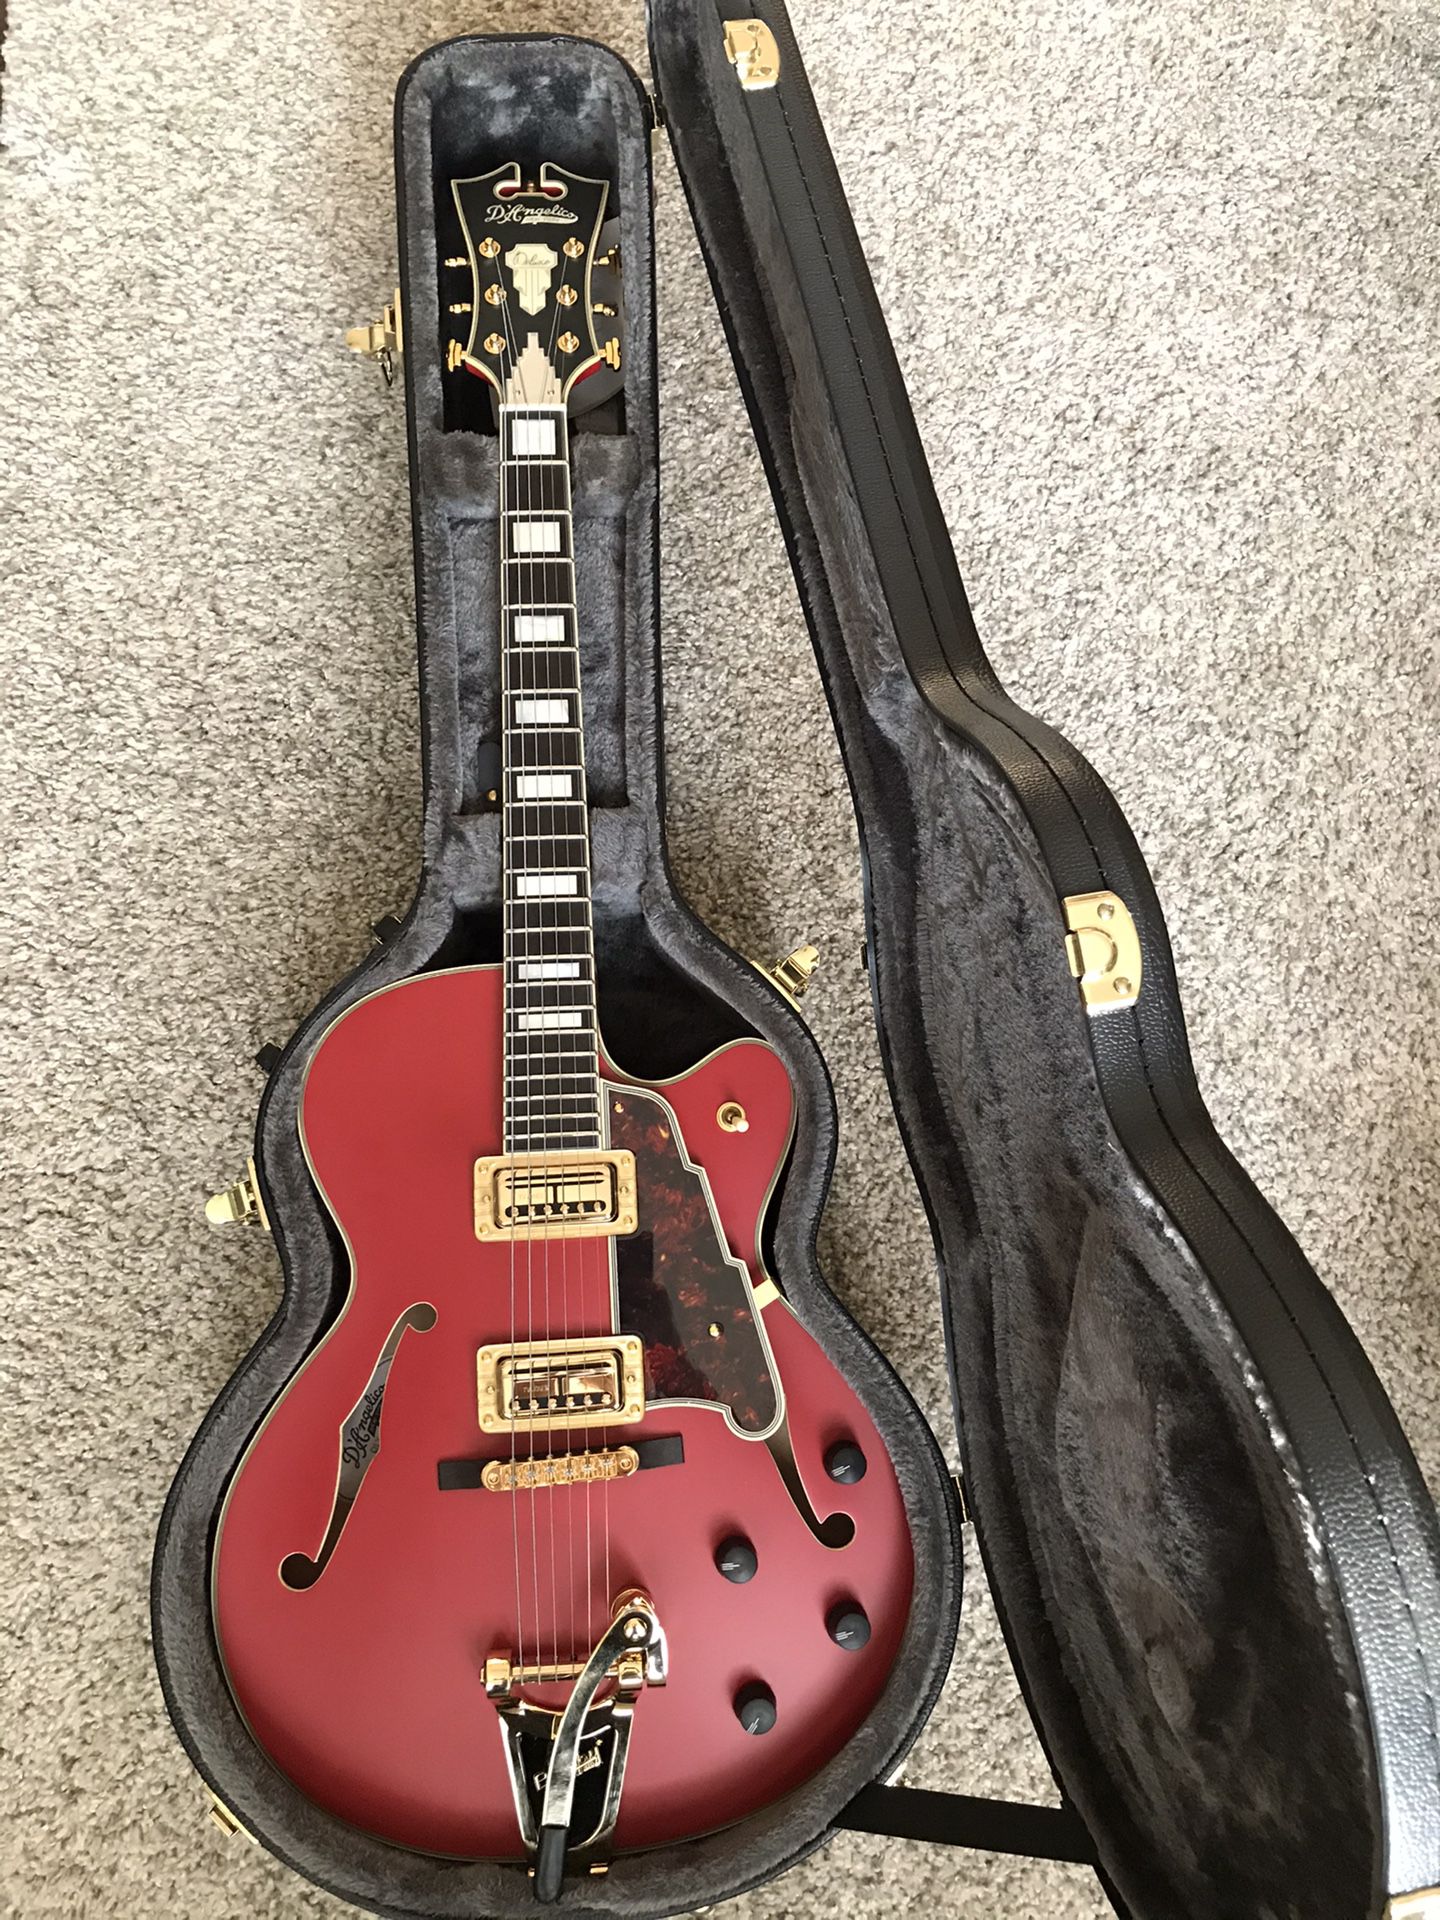 D'Angelico Deluxe 175 - cherry red - Limited Edition obo